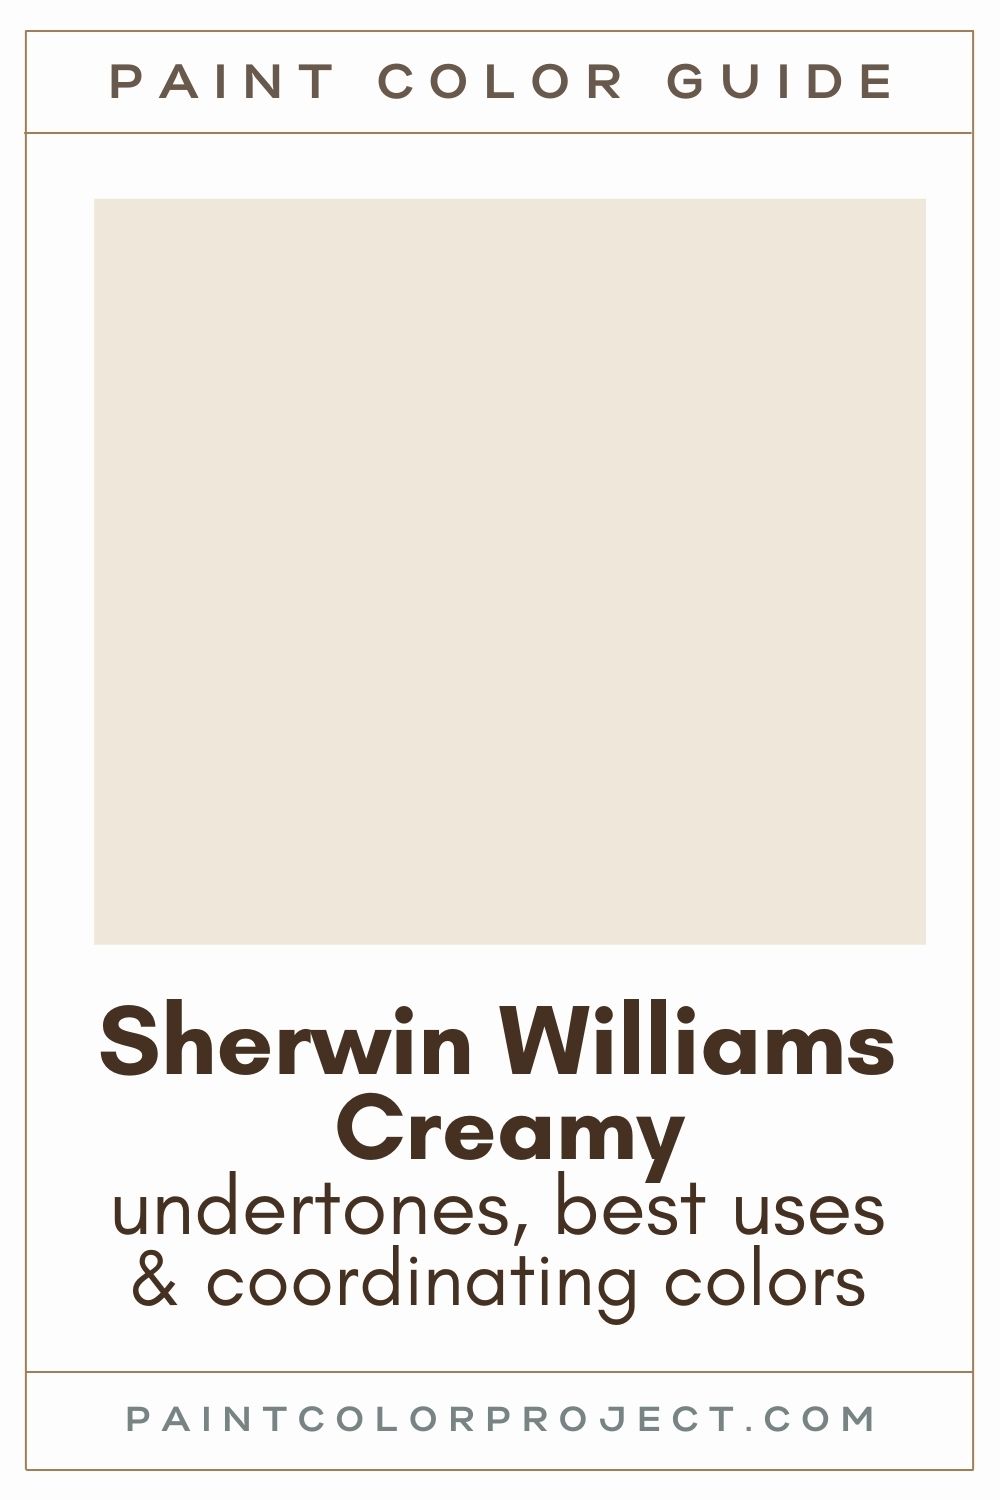 Sherwin Williams Creamy a complete color review The Paint Color Project